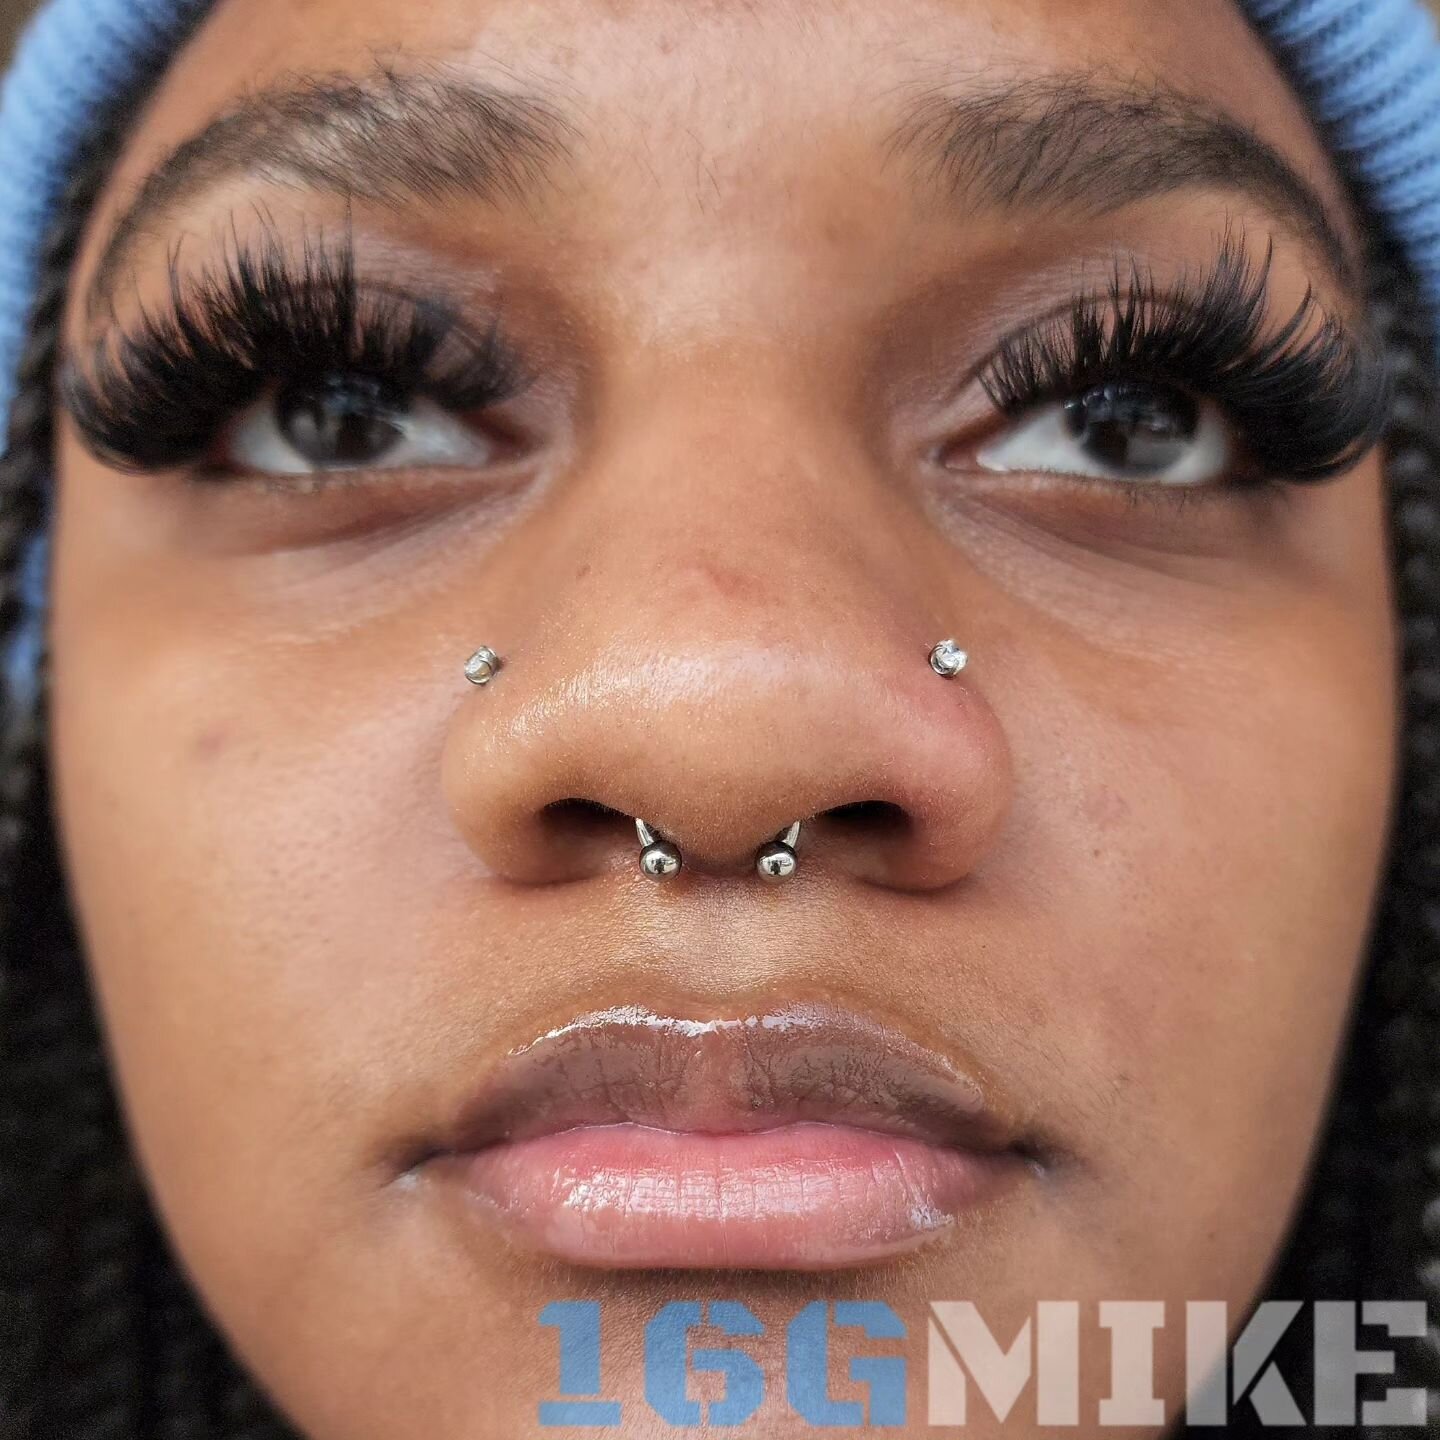 Did her septum a few weeks ago (healing up nicely) and pierced her left nostril today to match up the otherside.